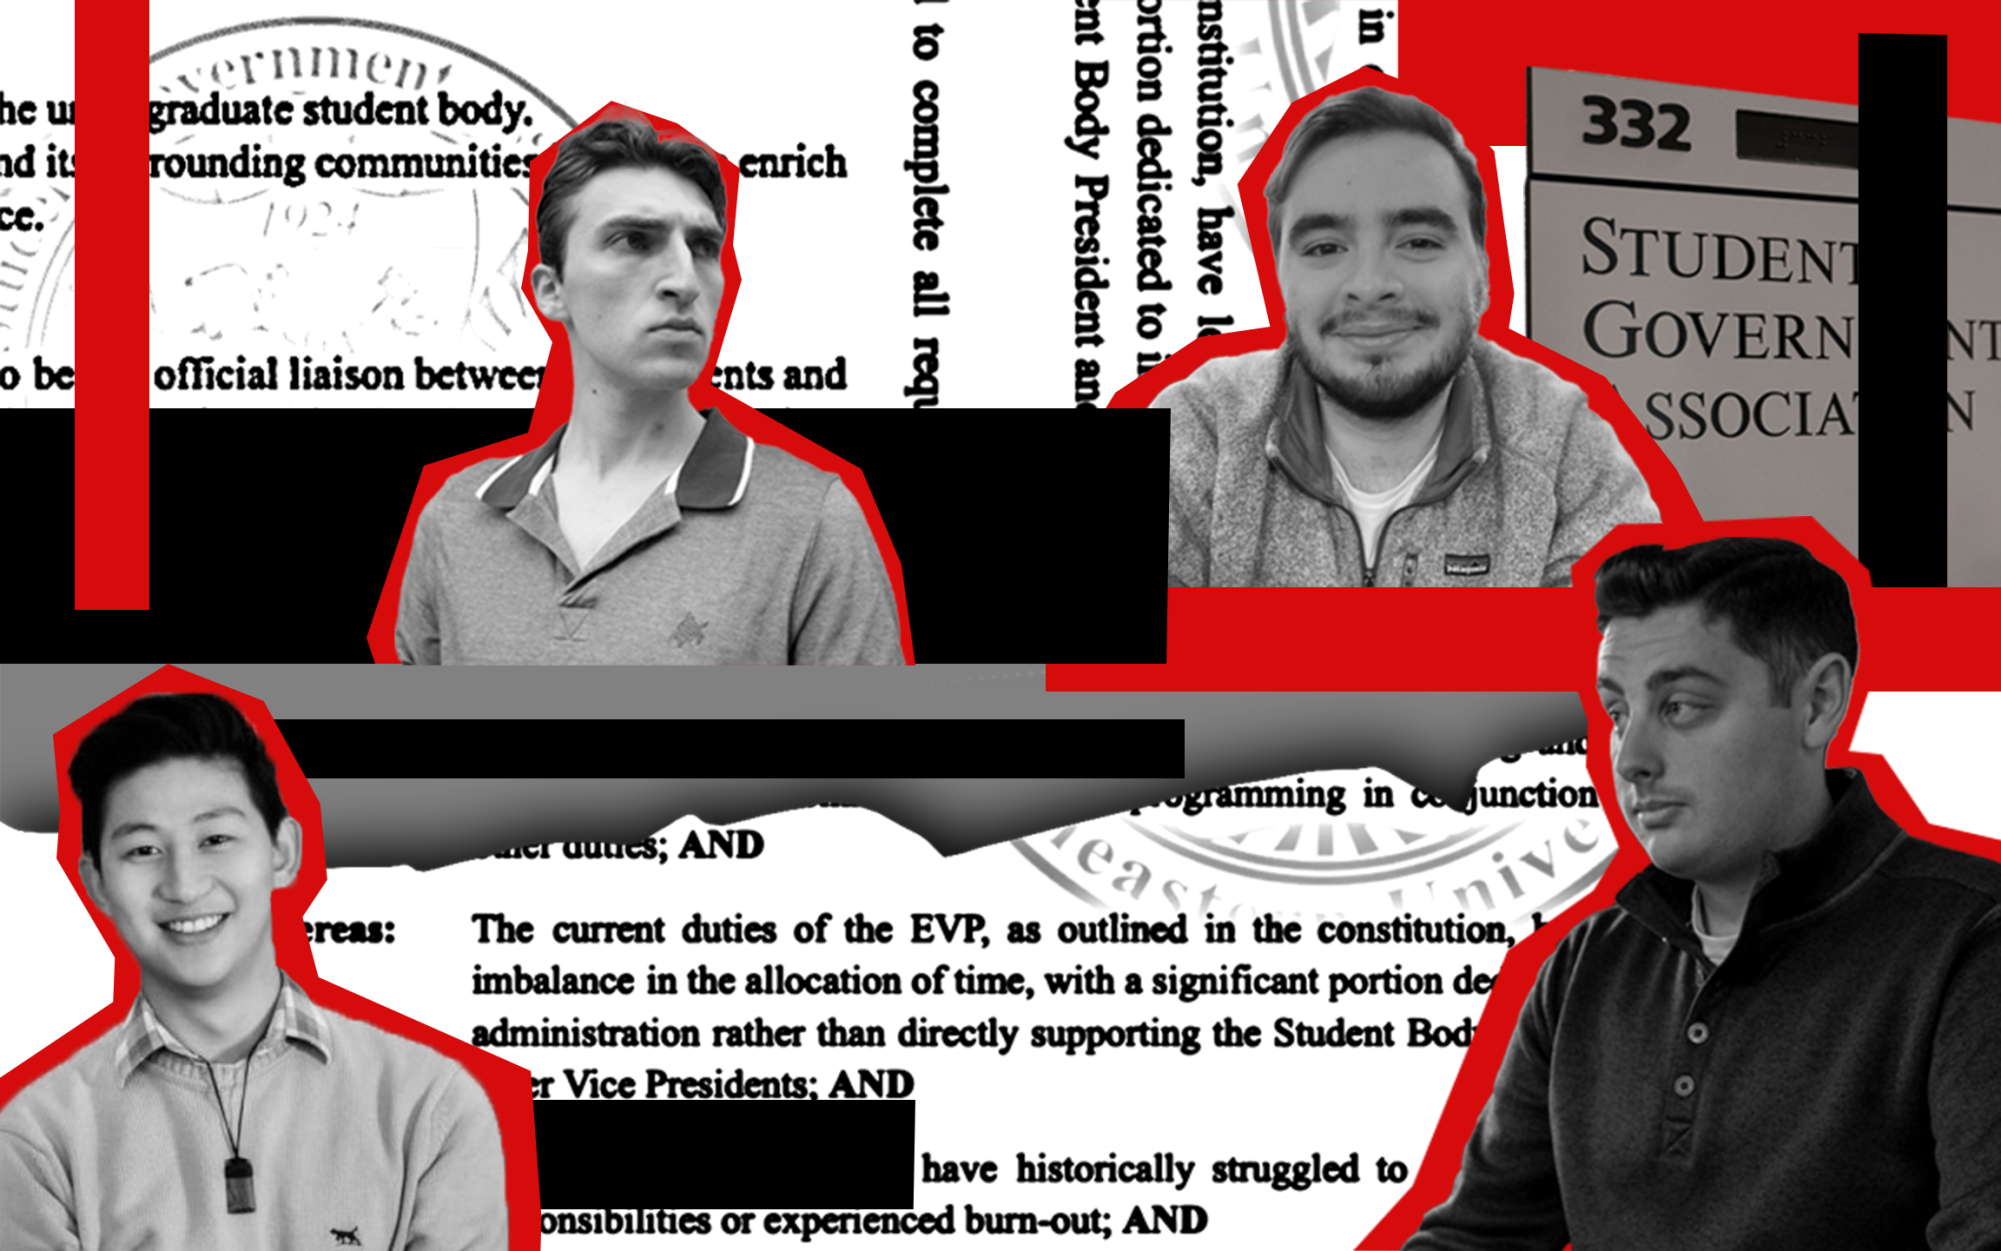 (Left to right, top to bottom) Gregory Katz, Owen Kasmin, Charlie Zhang and Giovanni Falco. Photos by Darin Zullo, courtesy Owen Kasmin, courtesy CLEAN slate and by Jessica Xing, respectively. Graphic by Jessica Xing.